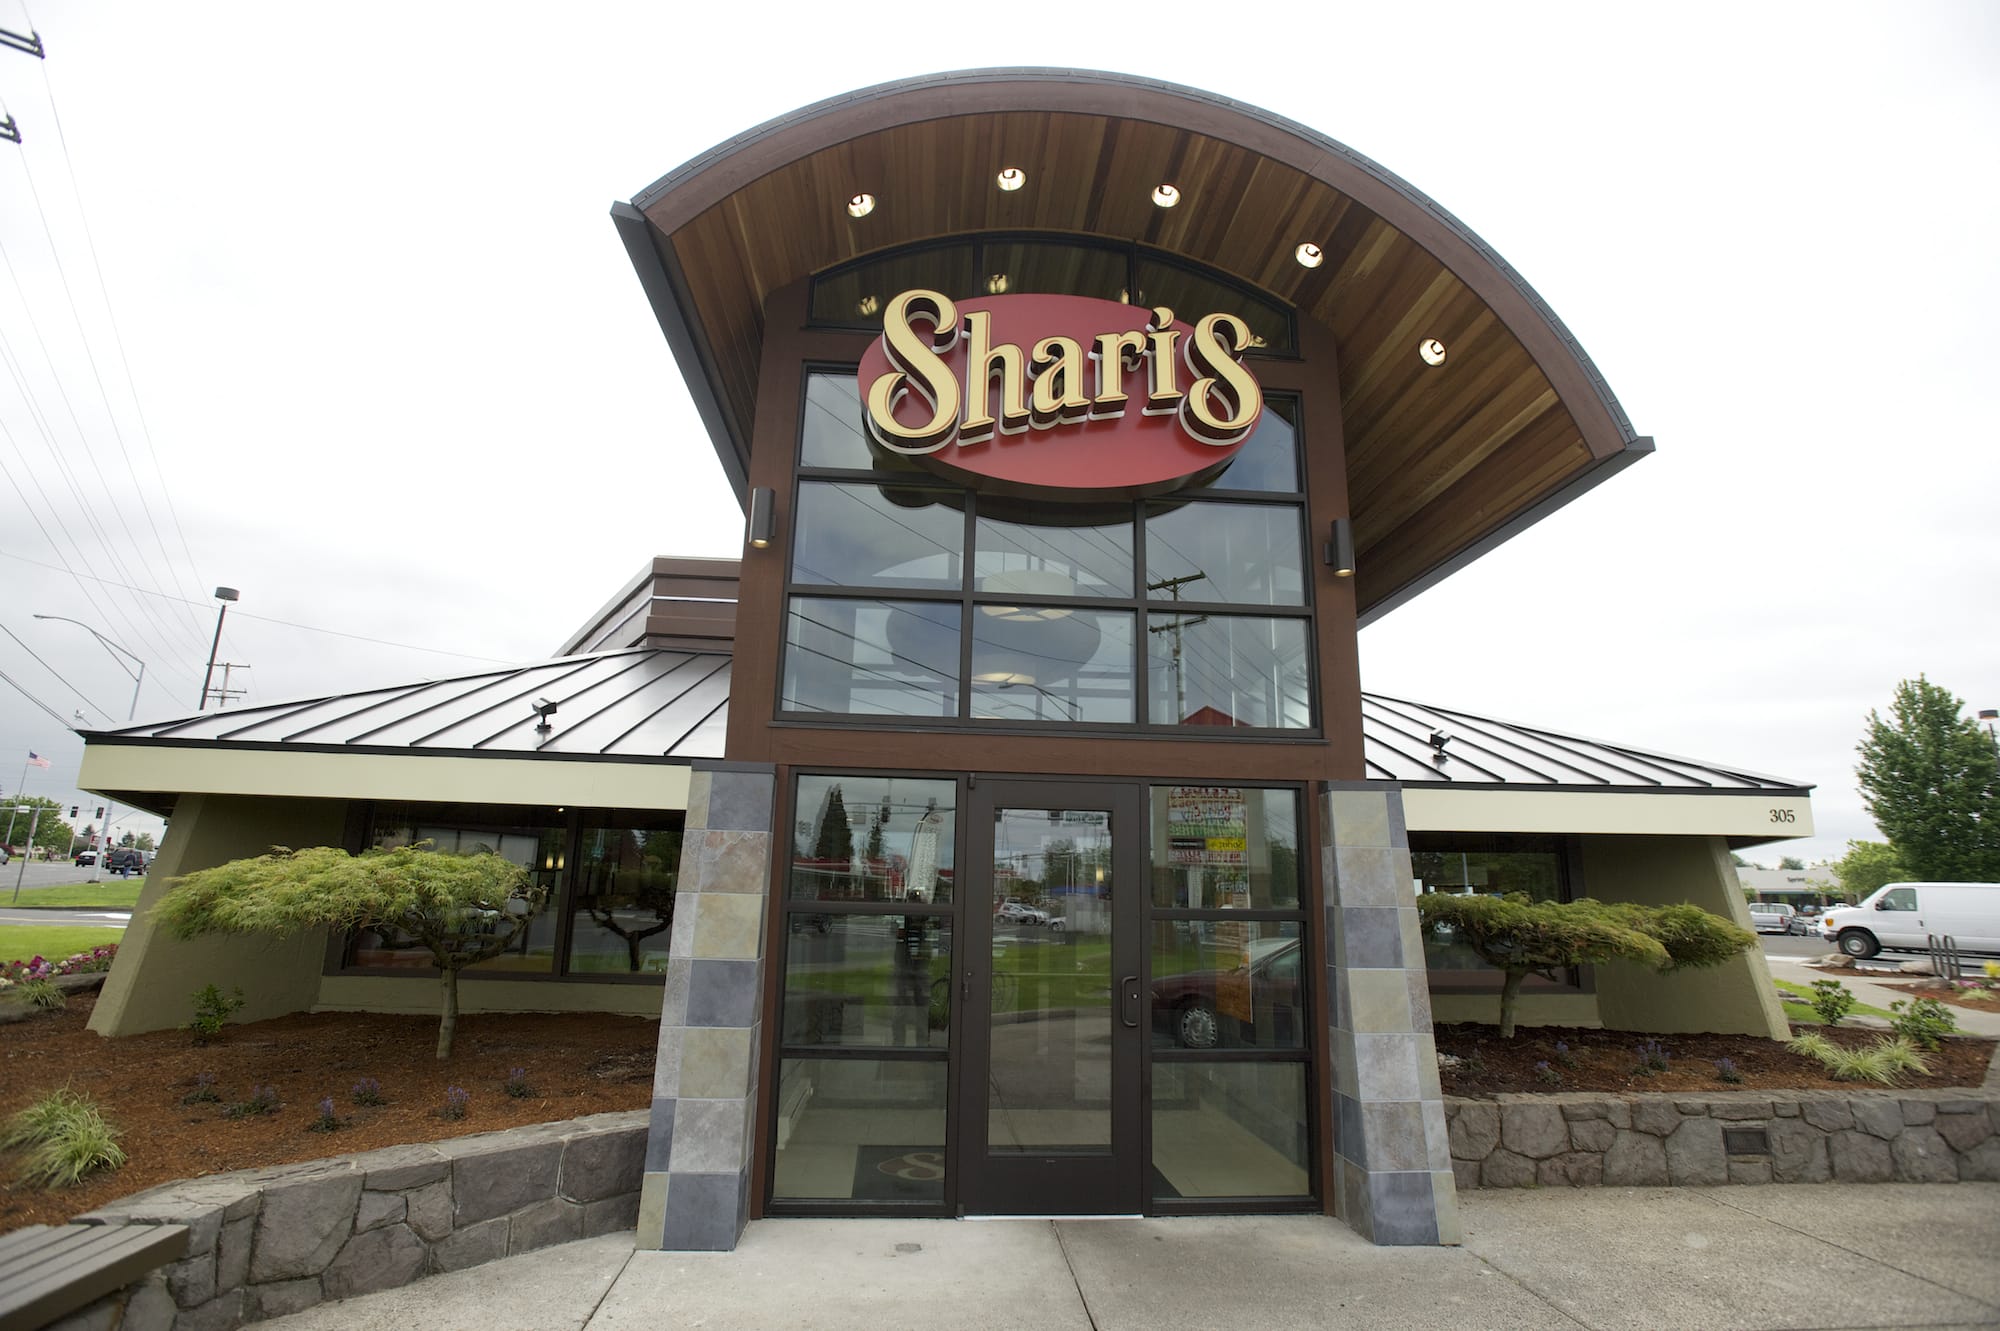 Work to install an arched timber portico over the main entrance to the hexagon-shaped Shari's Cafe &amp; Pies restaurant was part of a major construction facelift completed recently on the venue at 305 S.E.